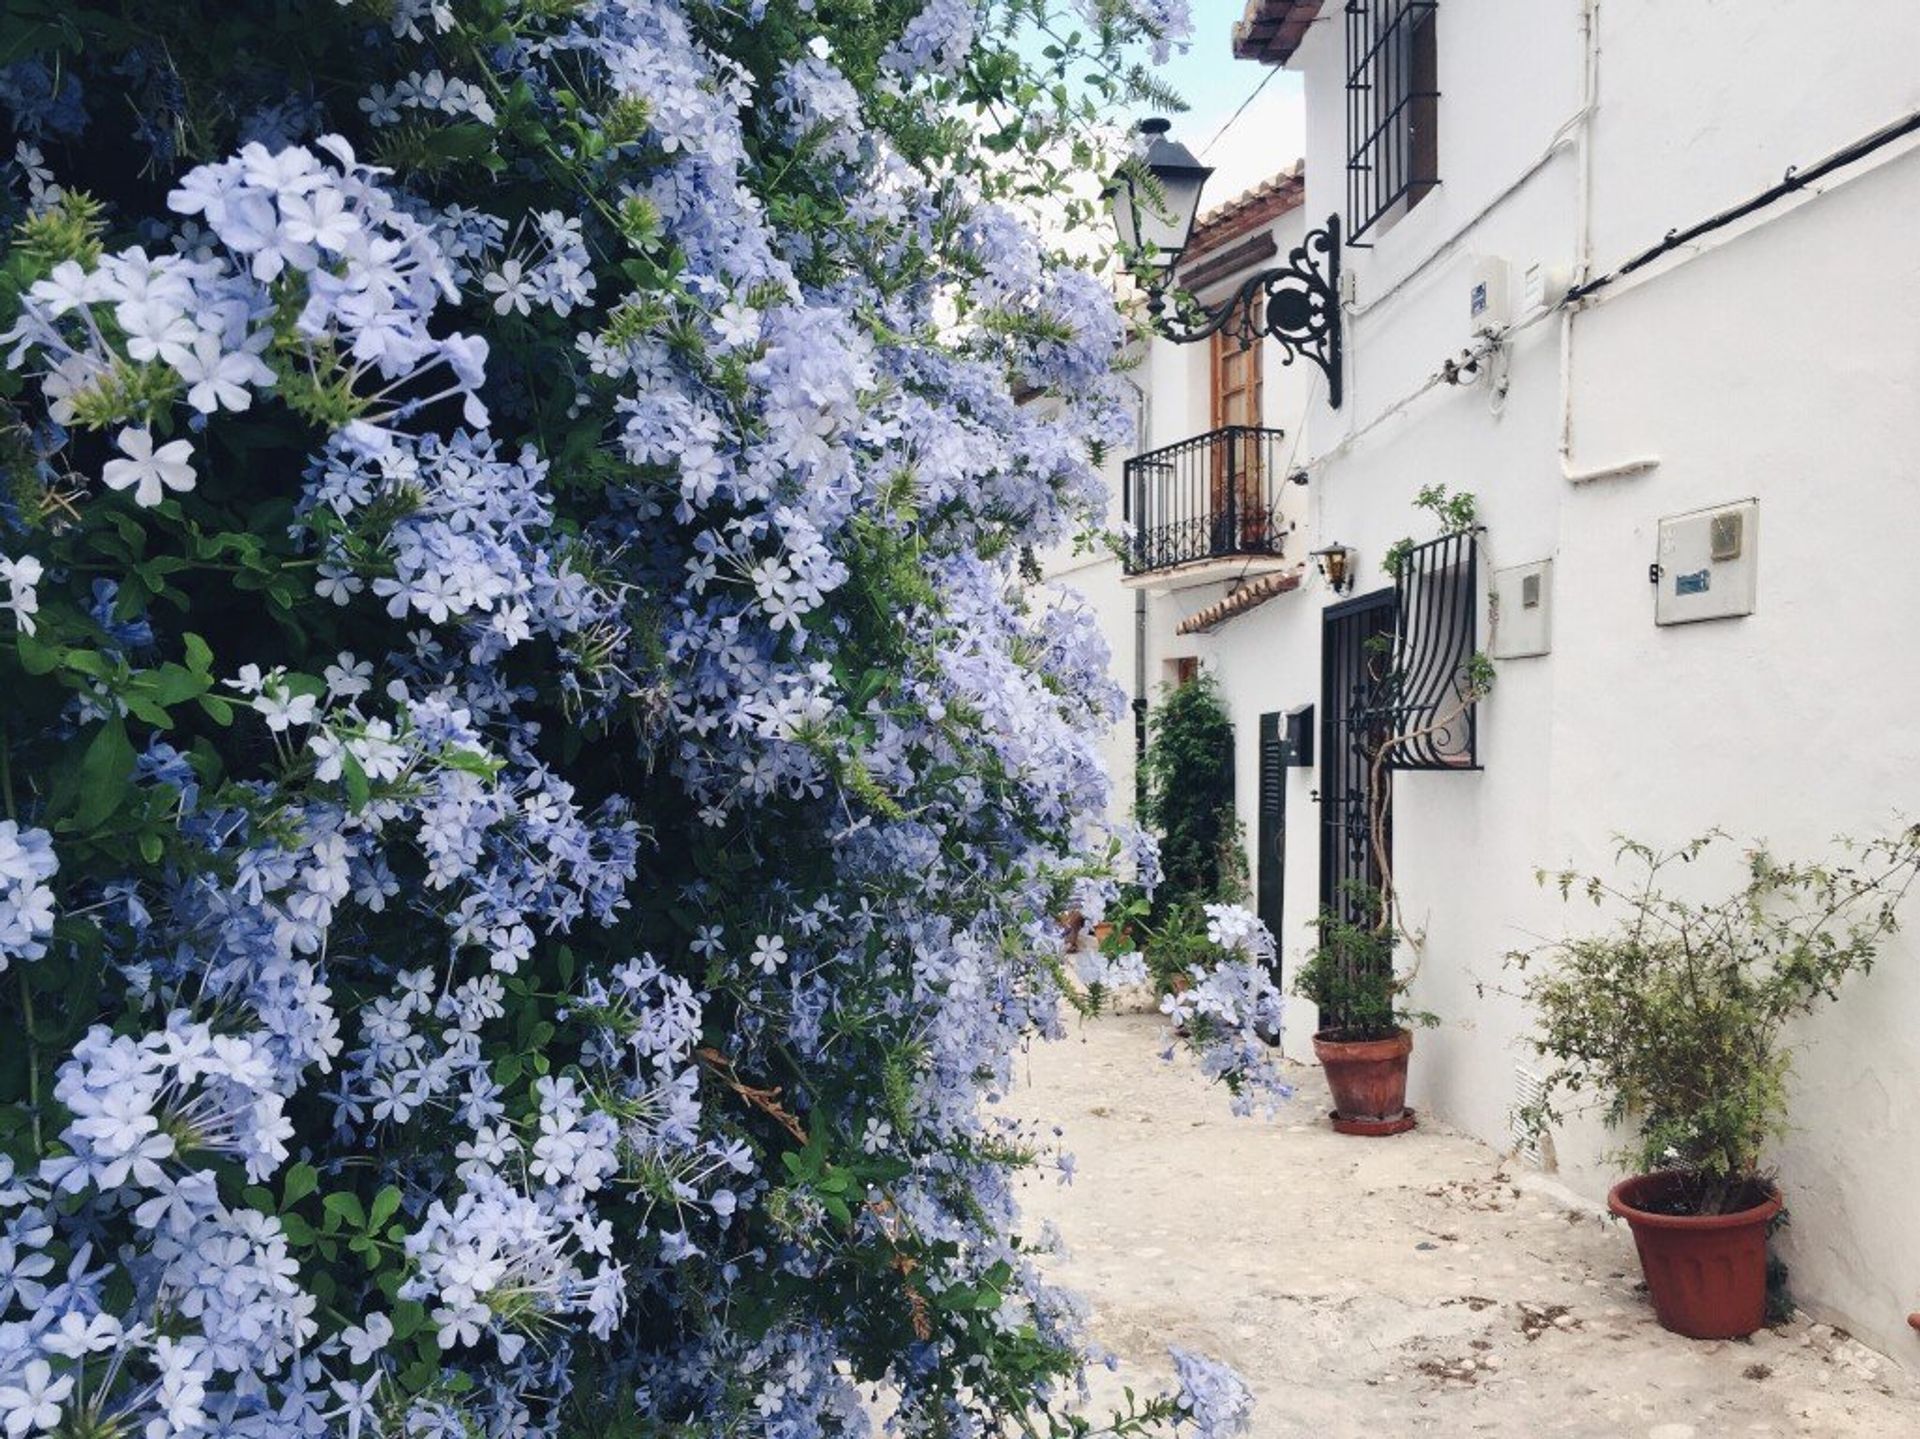 Altea is filled with the scent of blossom, from the alleyways of the old town to the beautiful bouquets sold on market day